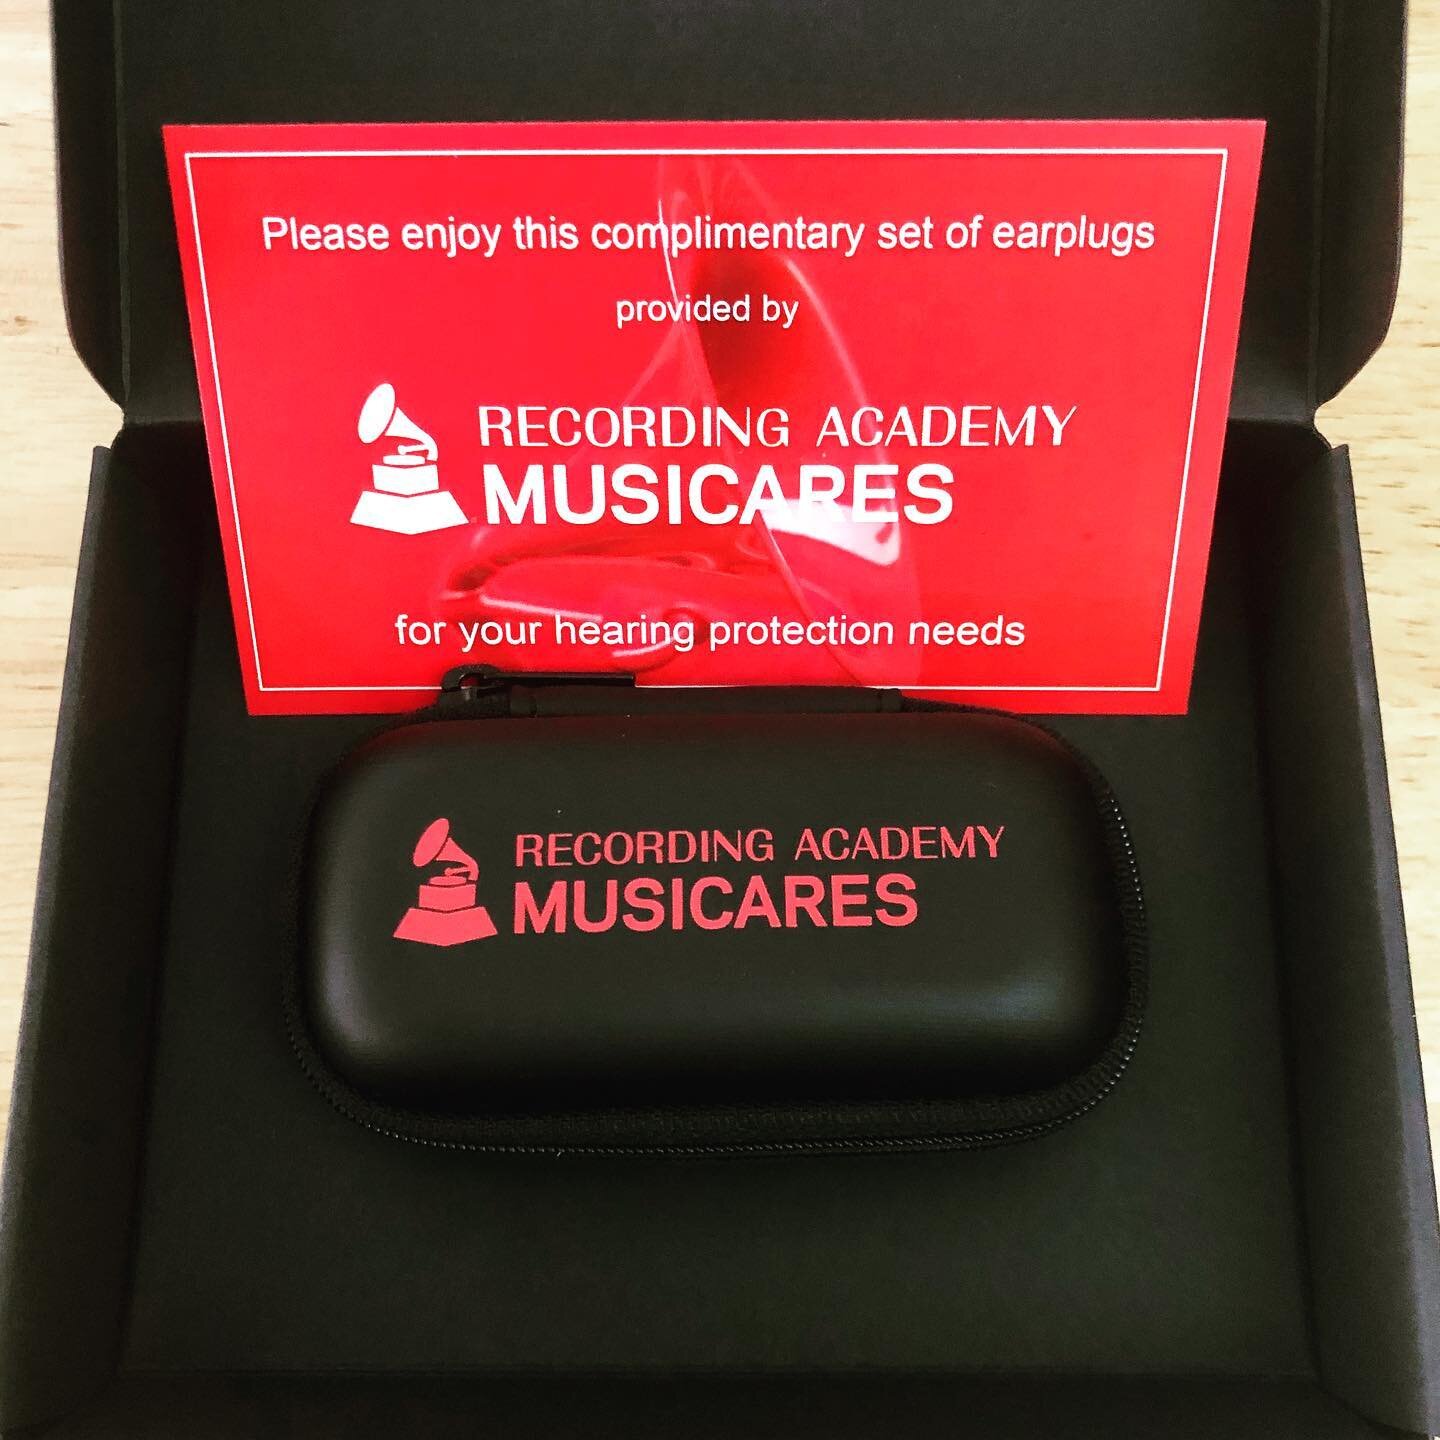 Major thank you to @musicares and @acscustomusa for doing this great deed, putting in their time + money to setup at festivals and offer free custom fit earplugs to us industry people! Simply amazing and so much appreciated! Perfect fit - still hear 